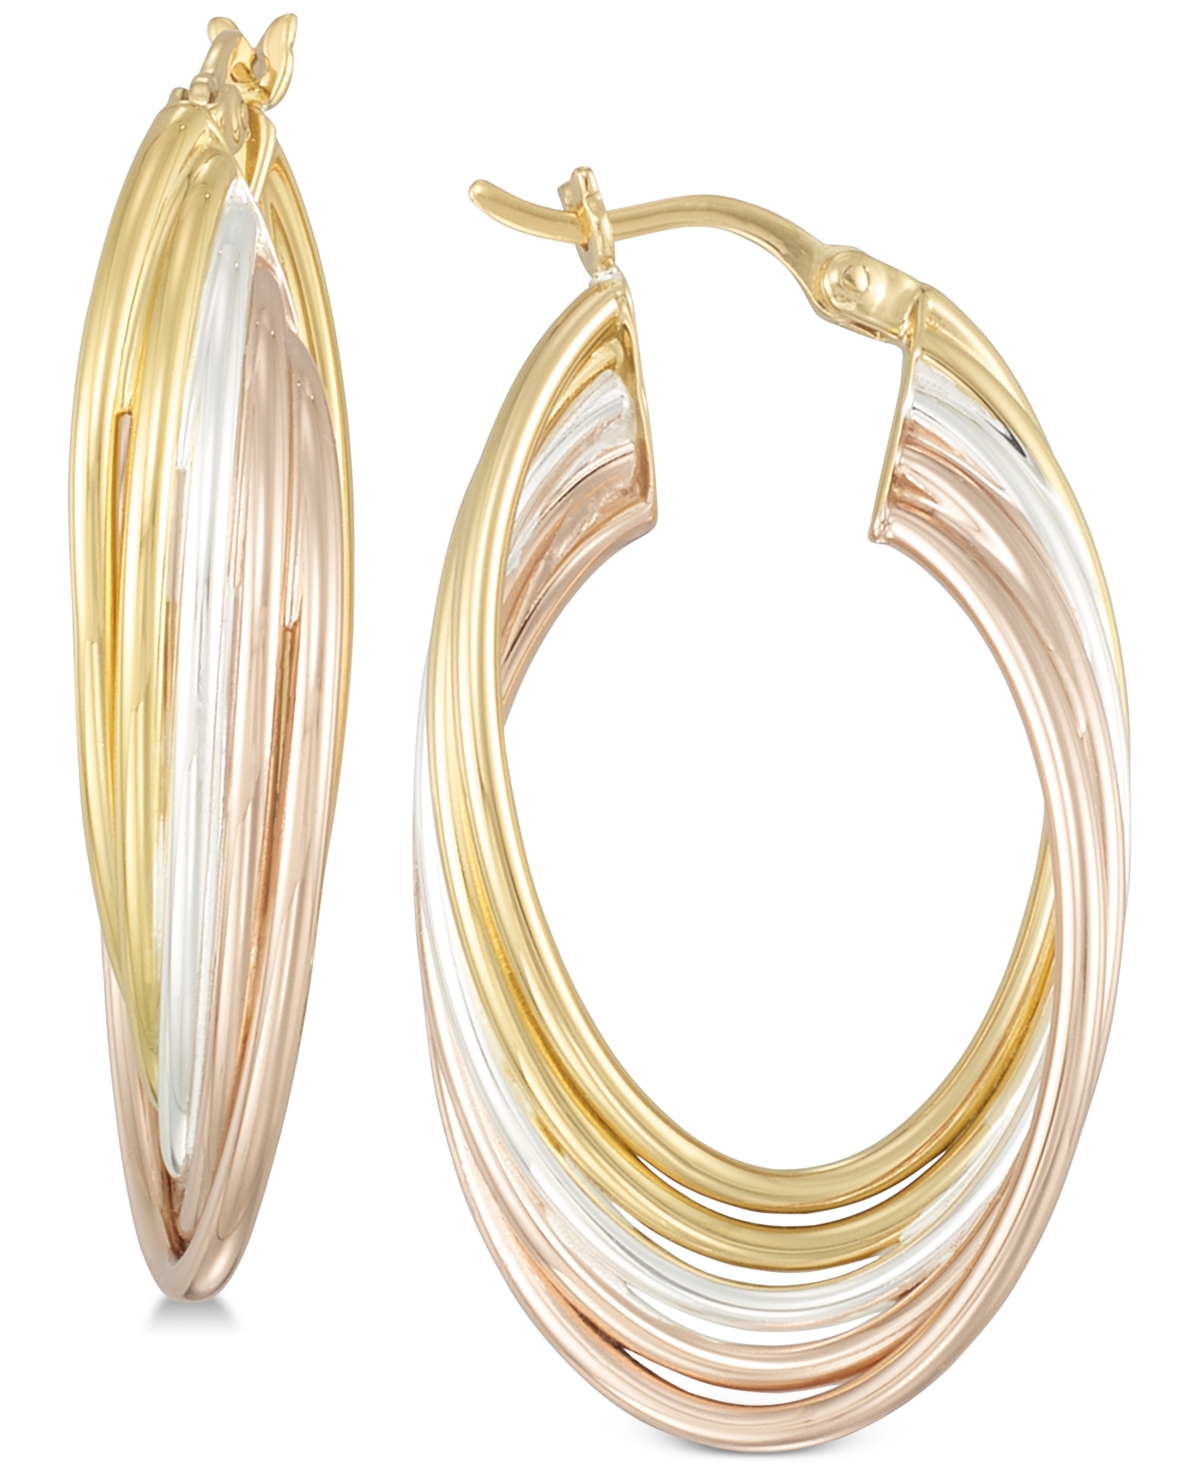 Tricolor Multi-Ring Hoop Earrings in Sterling Silver and 18k Gold & Rose Gold over Sterling Silver - Tricolor